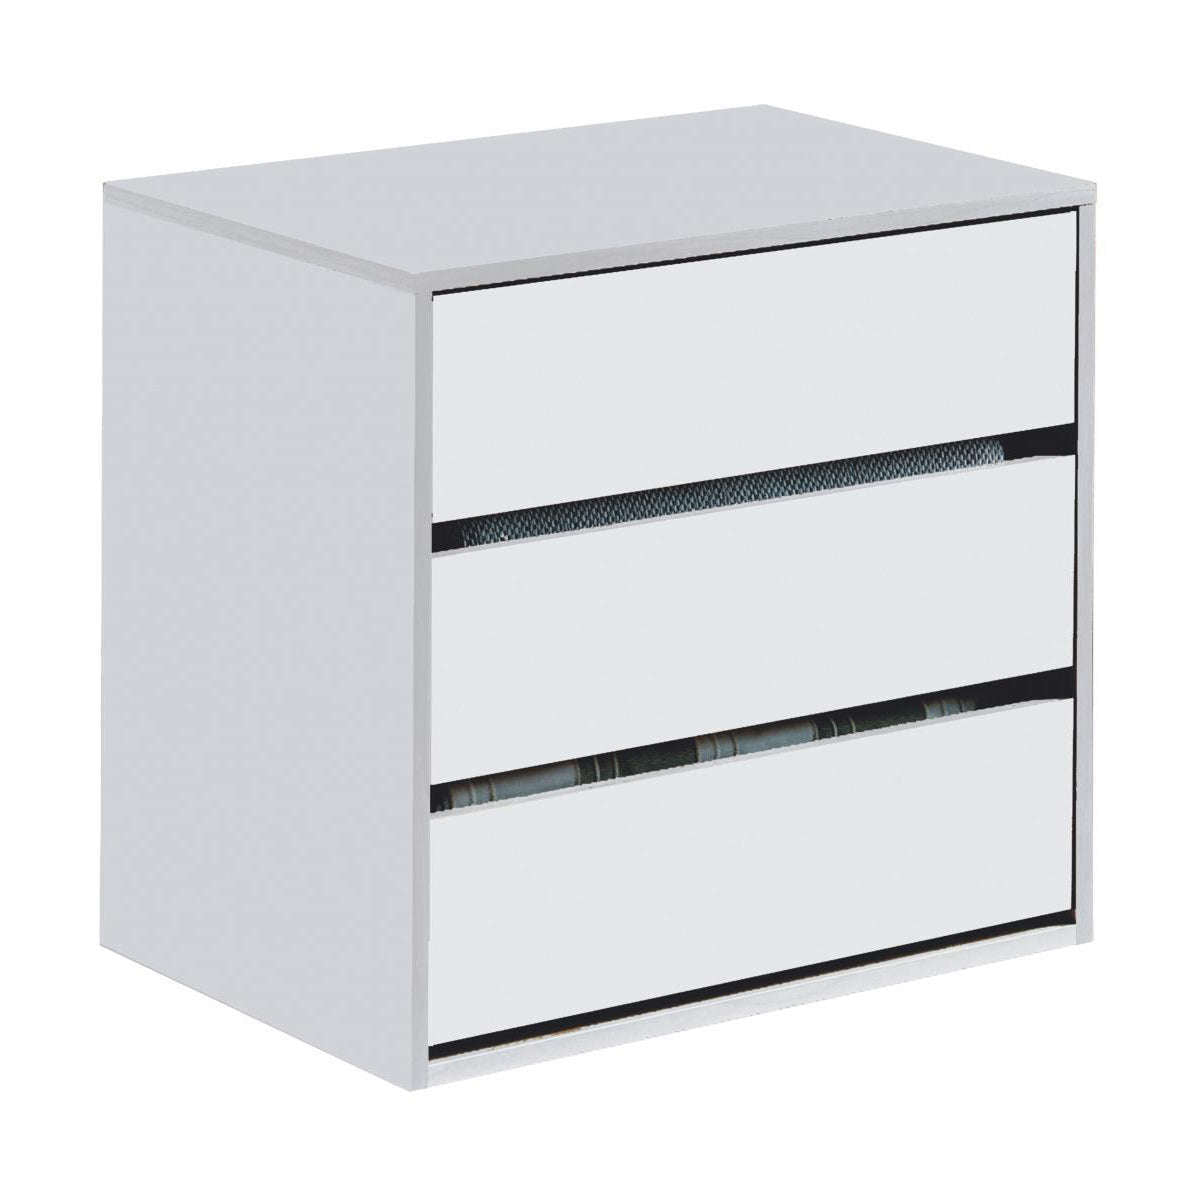 Ashpinoke:Arctic Drawer Unit 3 Drawer White ARC6030BO,Chests and Drawers,Heartlands Furniture